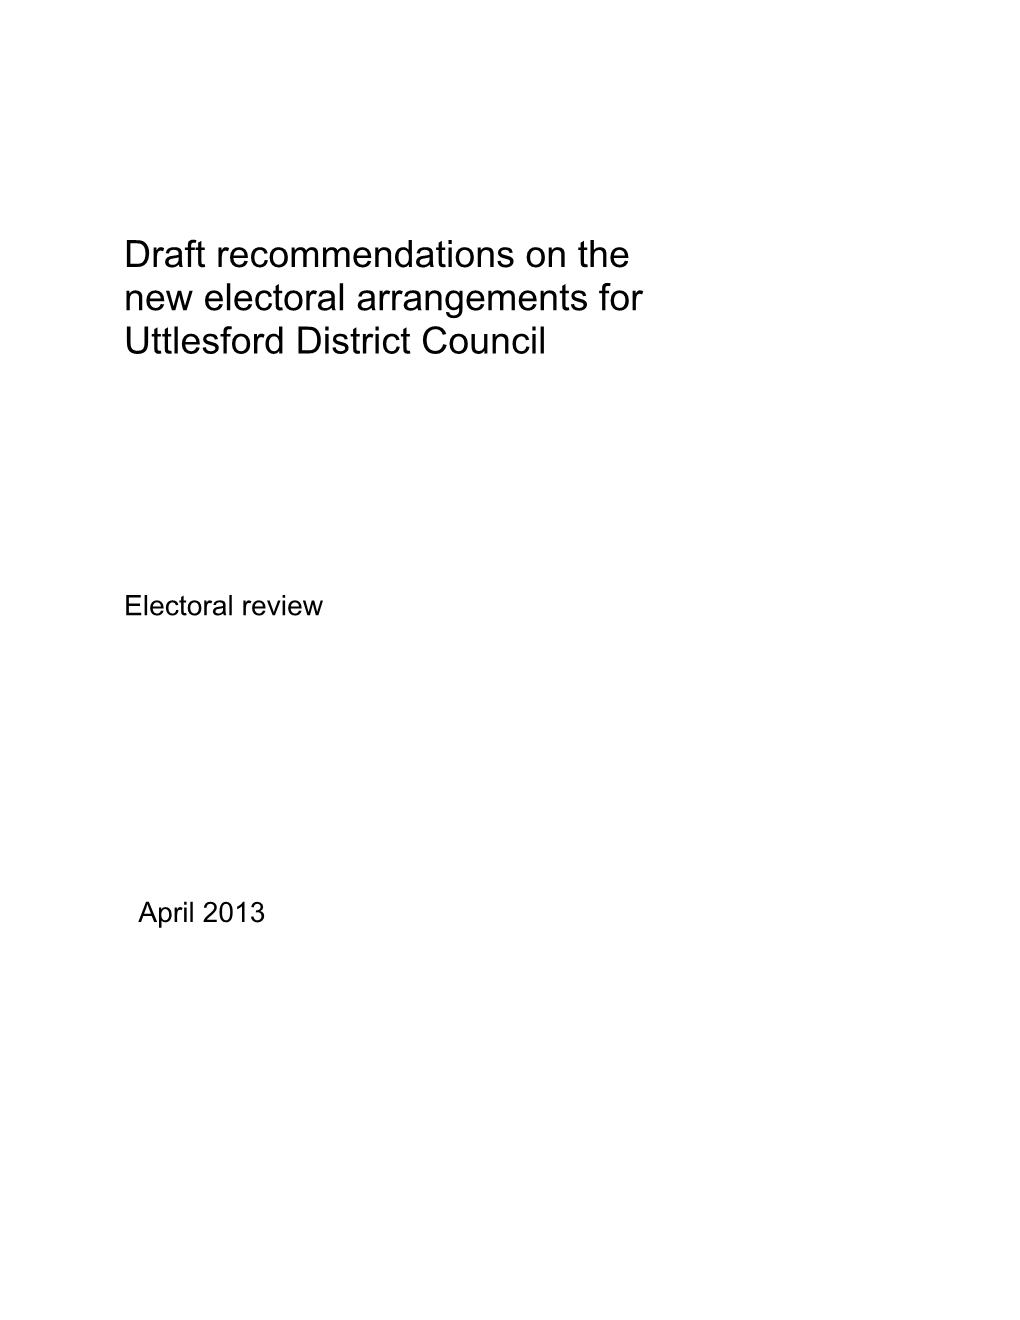 Draft Recommendations Report for Uttlesford District Council